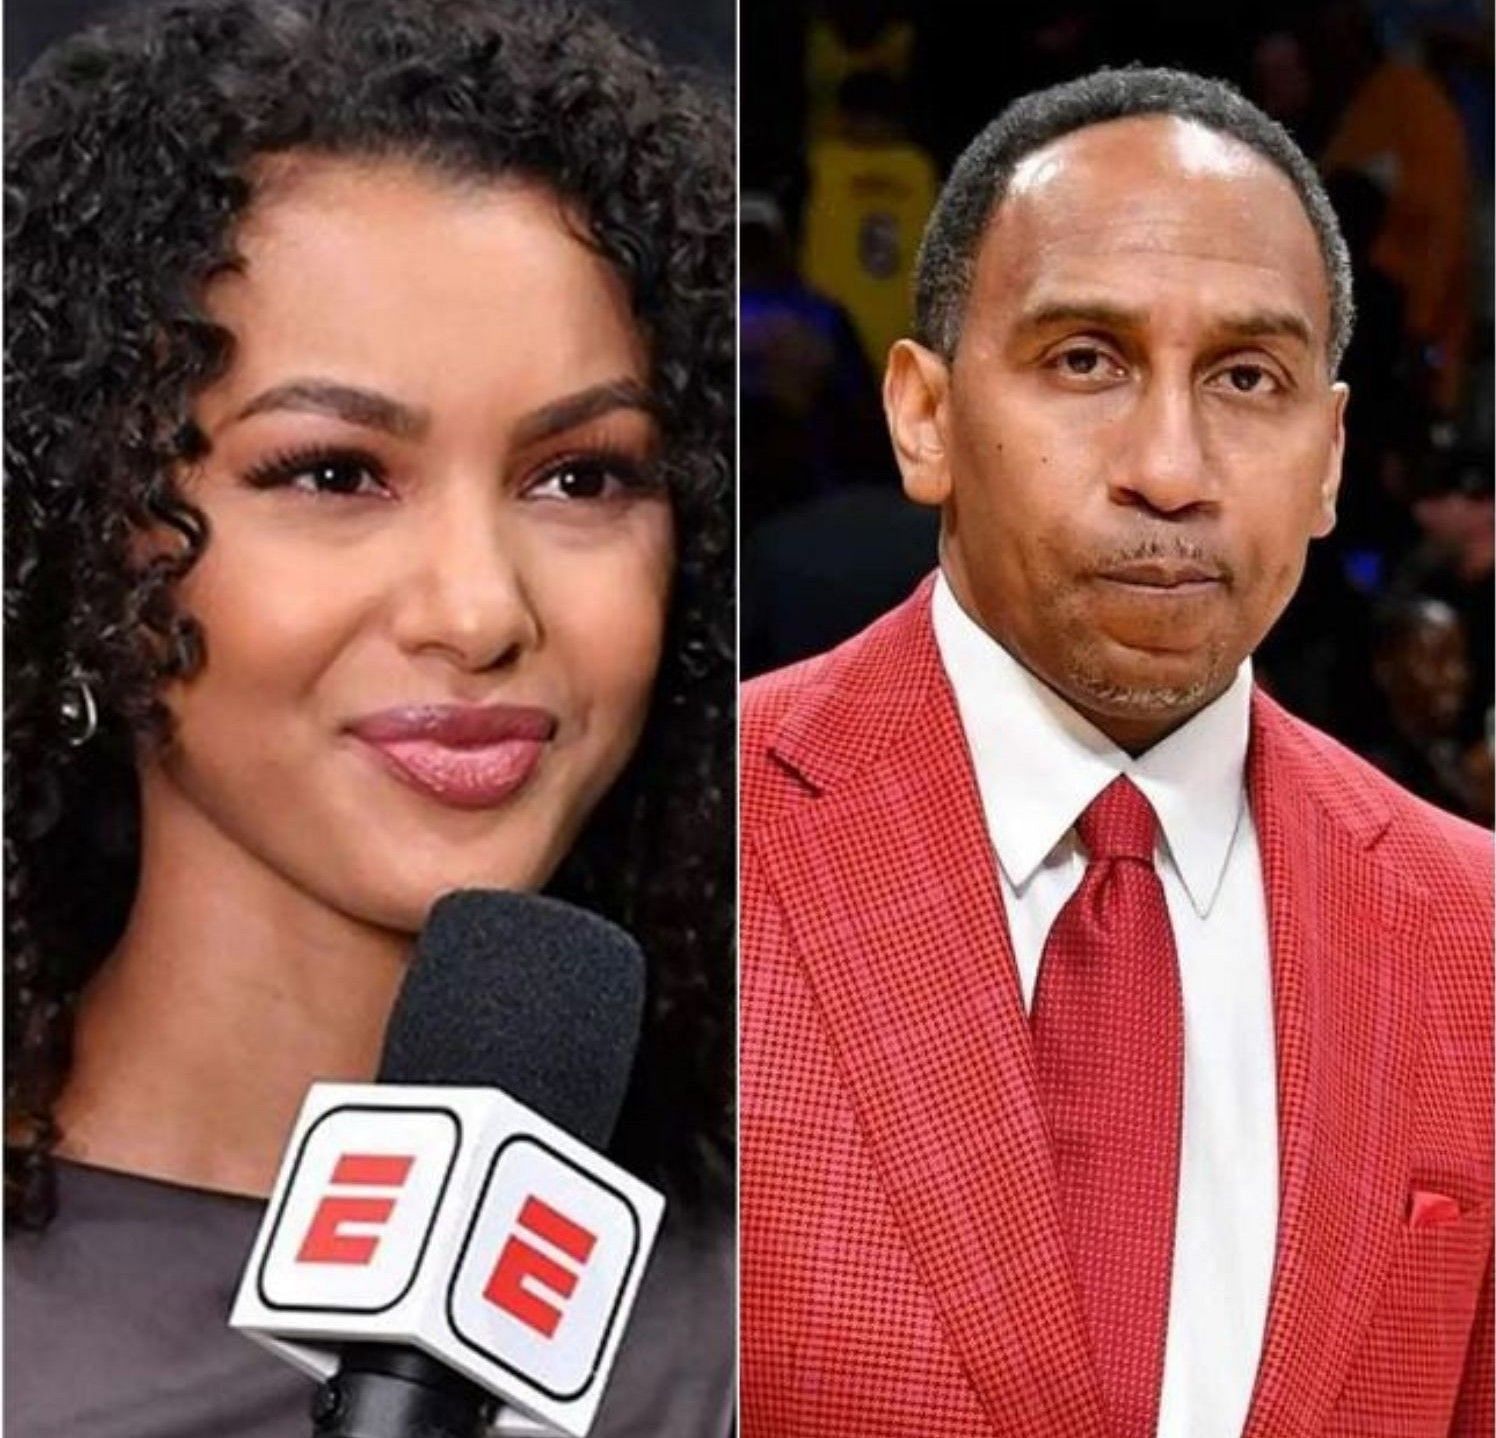 Stephen A. Smith (R) has the back of ESPN colleague Malika Andrews (L) in accusations hurled at her recently.